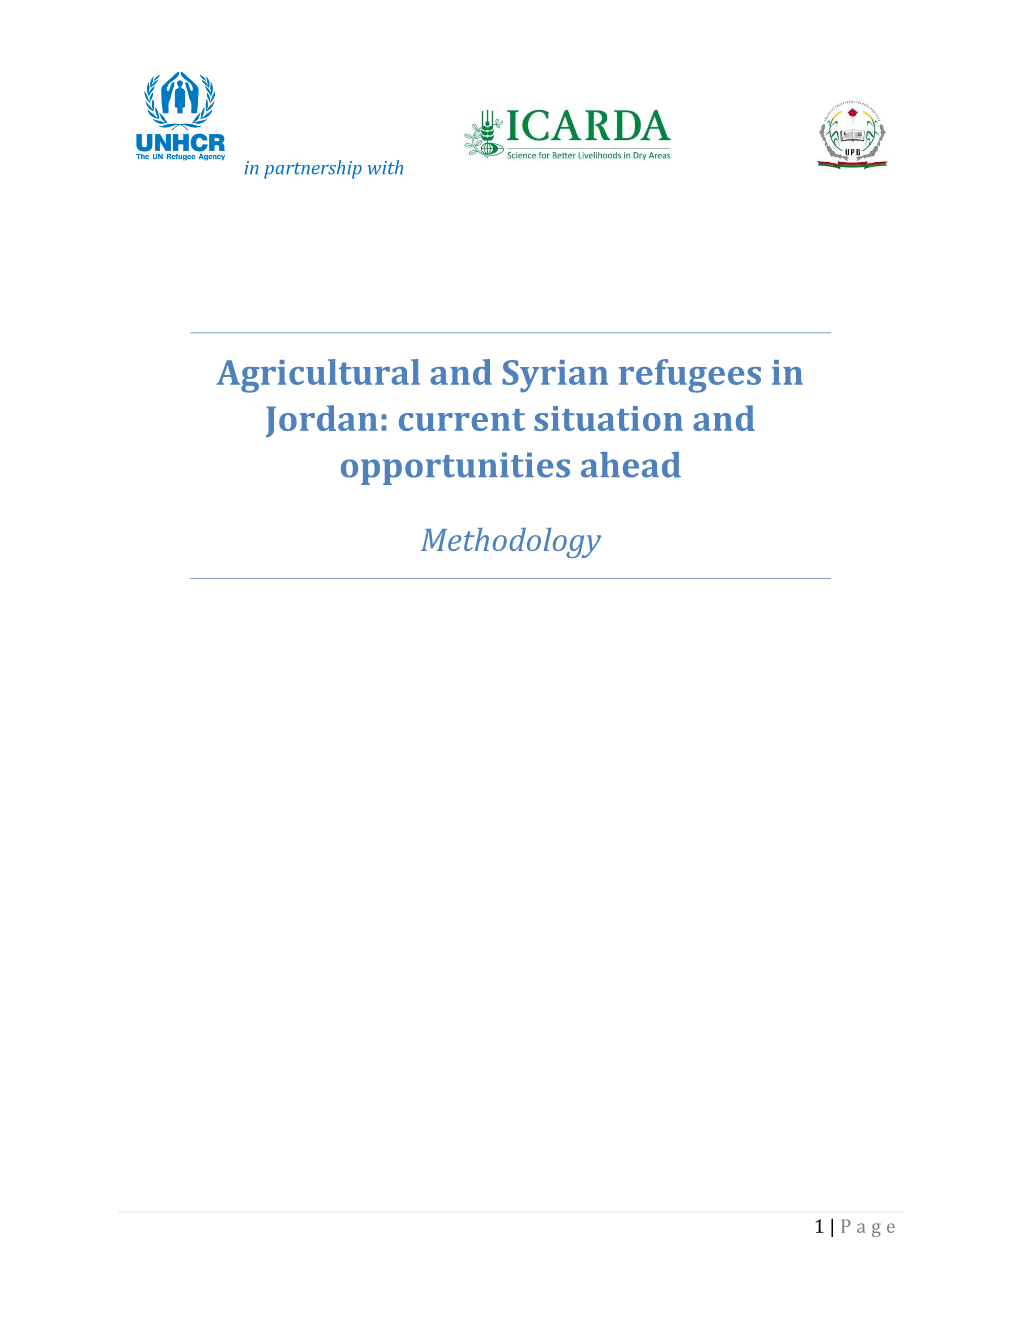 Agricultural and Syrian Refugees in Jordan: Current Situation and Opportunities Ahead